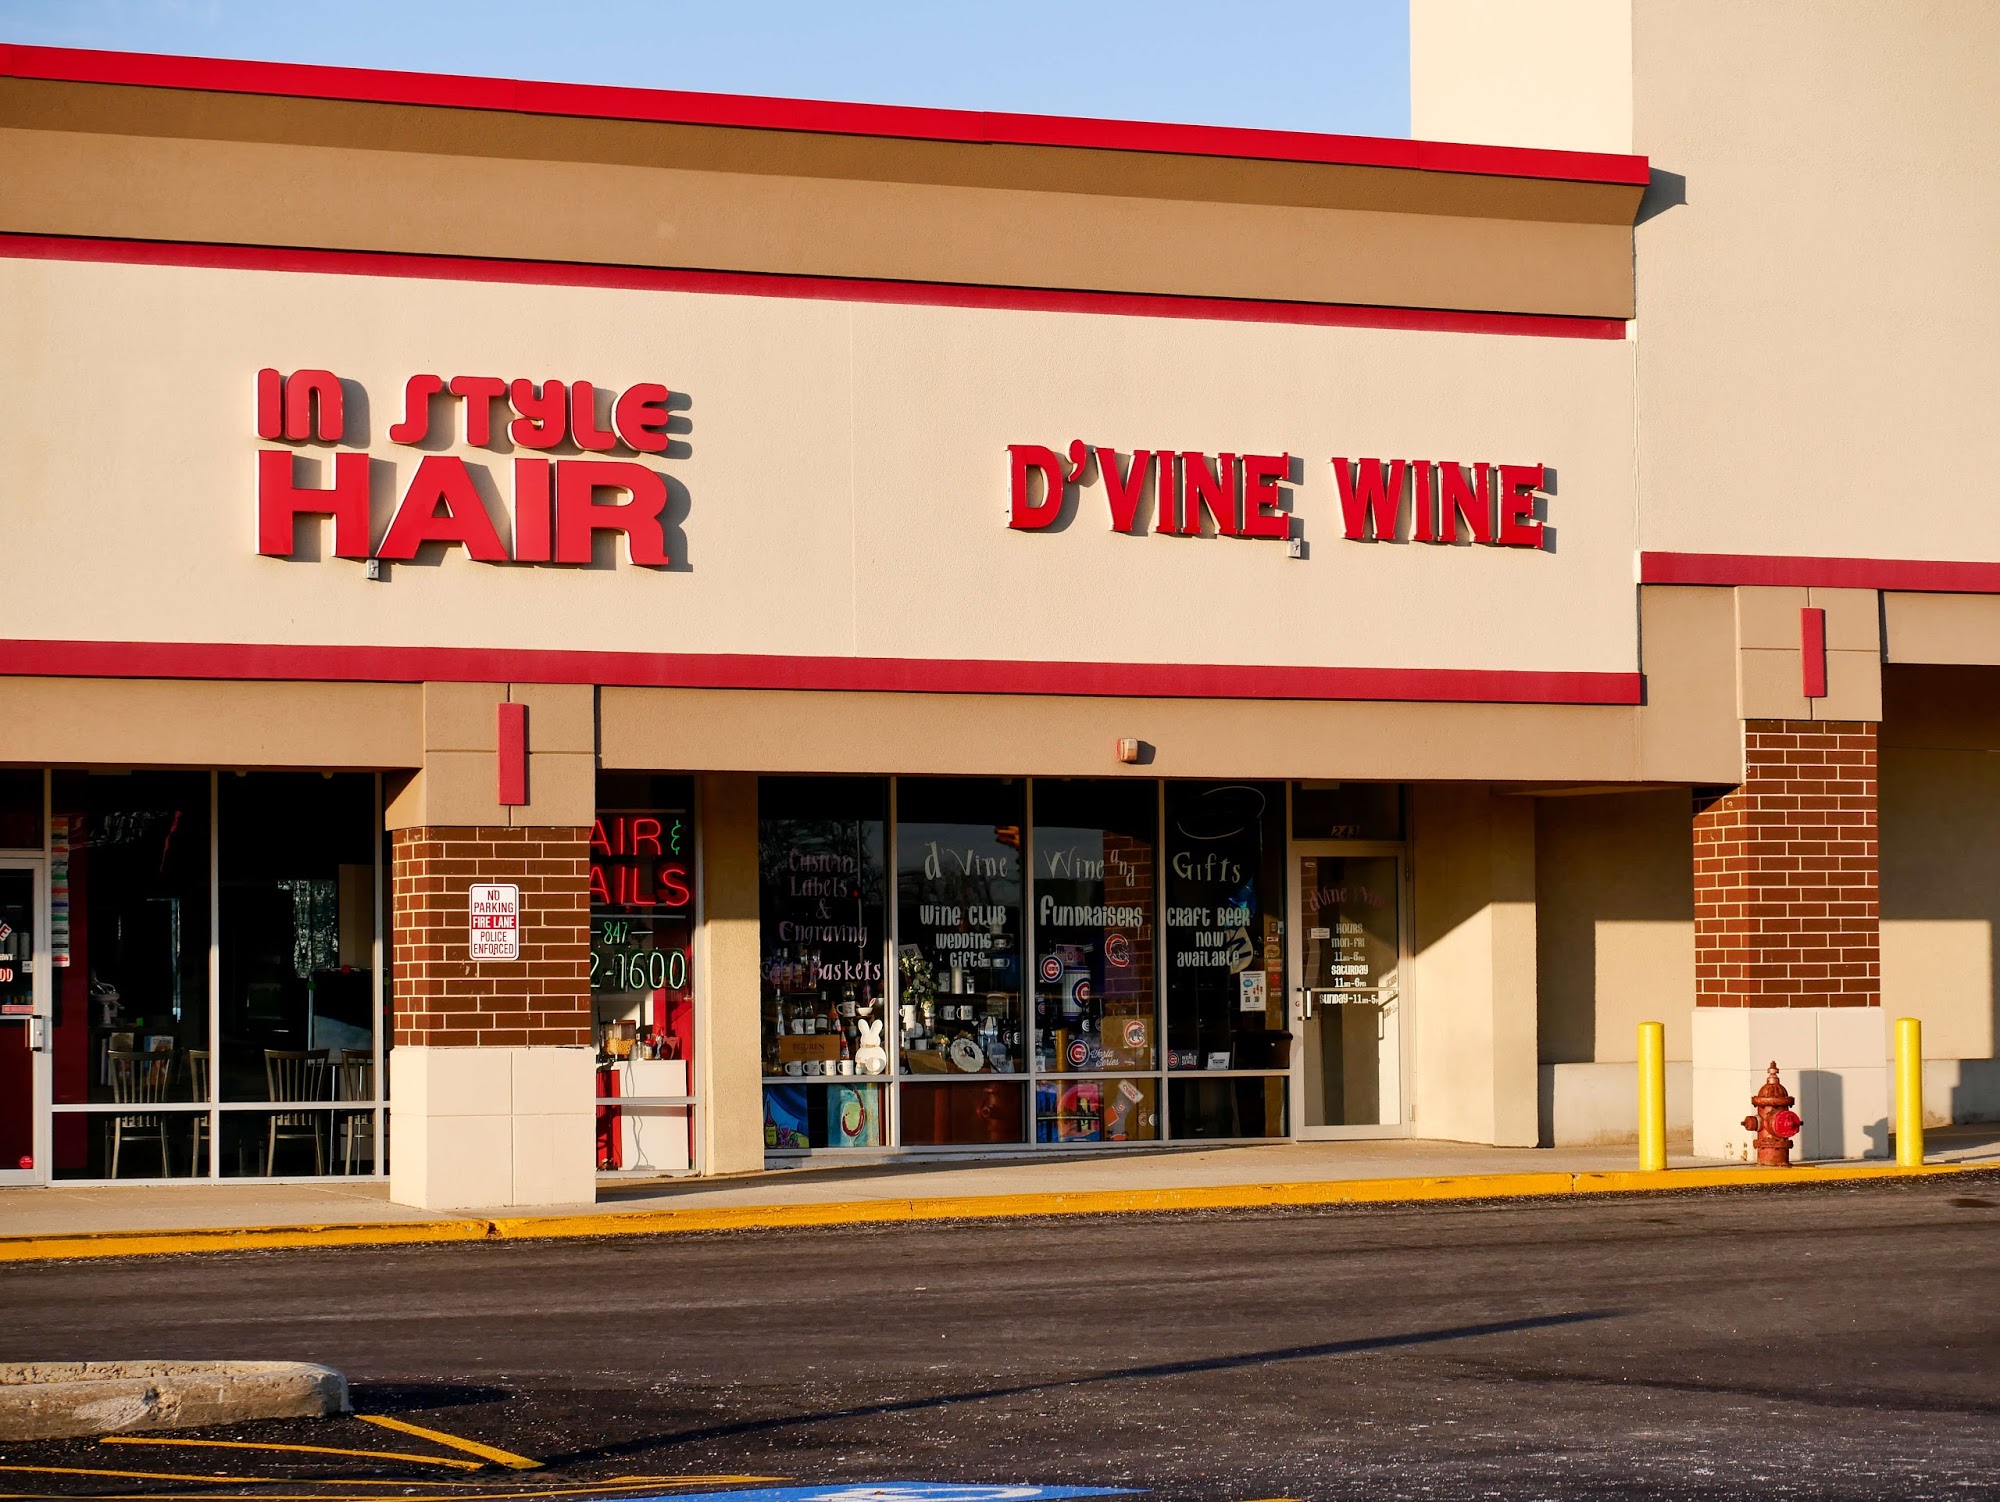 D'Vine Wine and Gifts